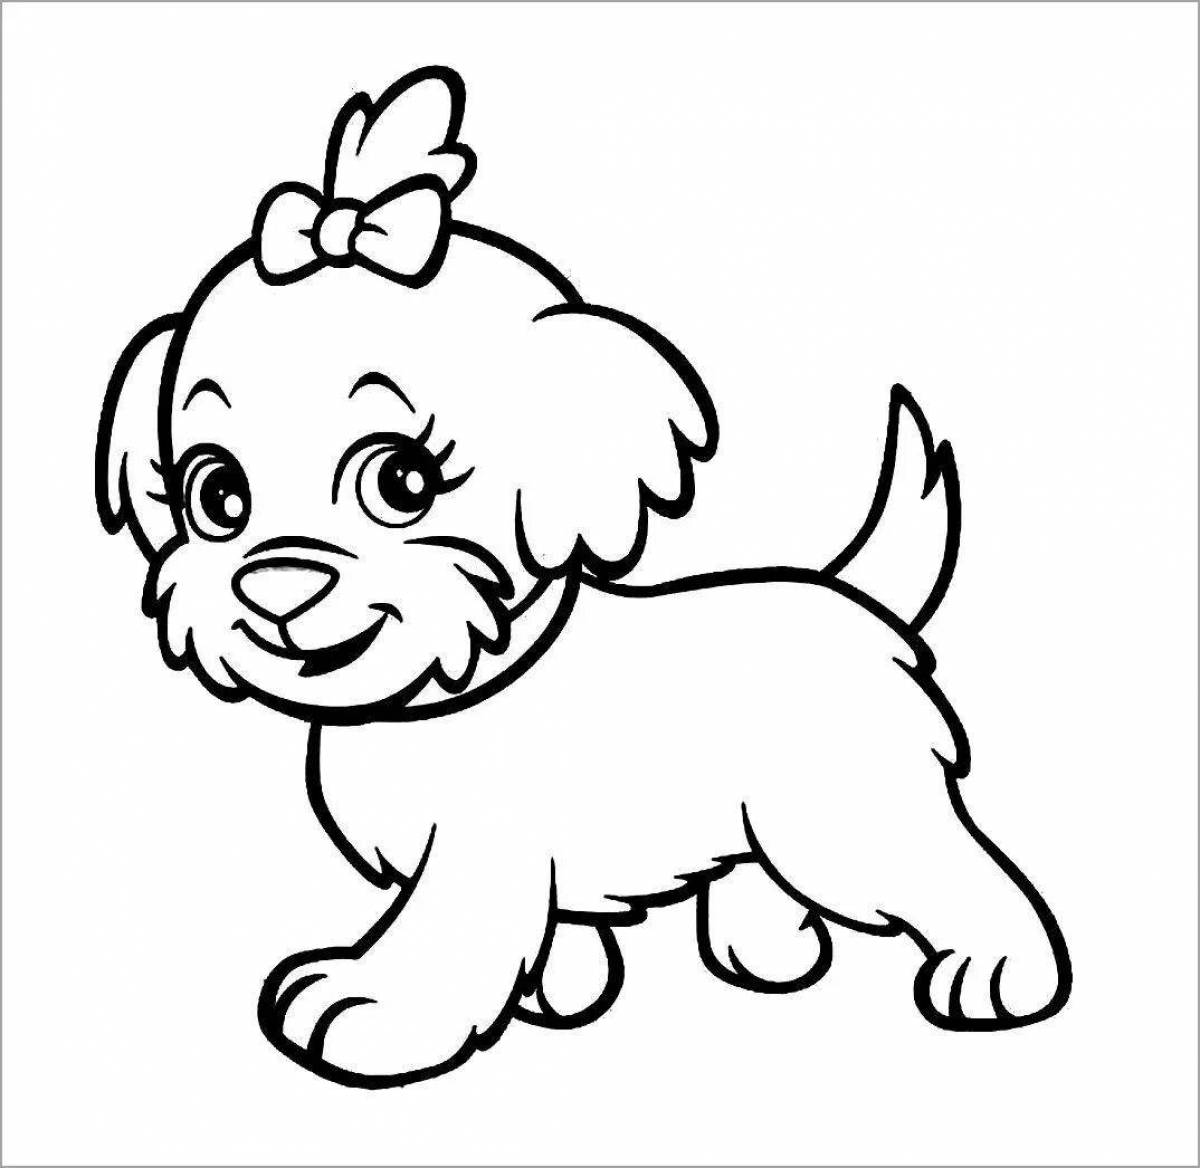 Animated light dog coloring page